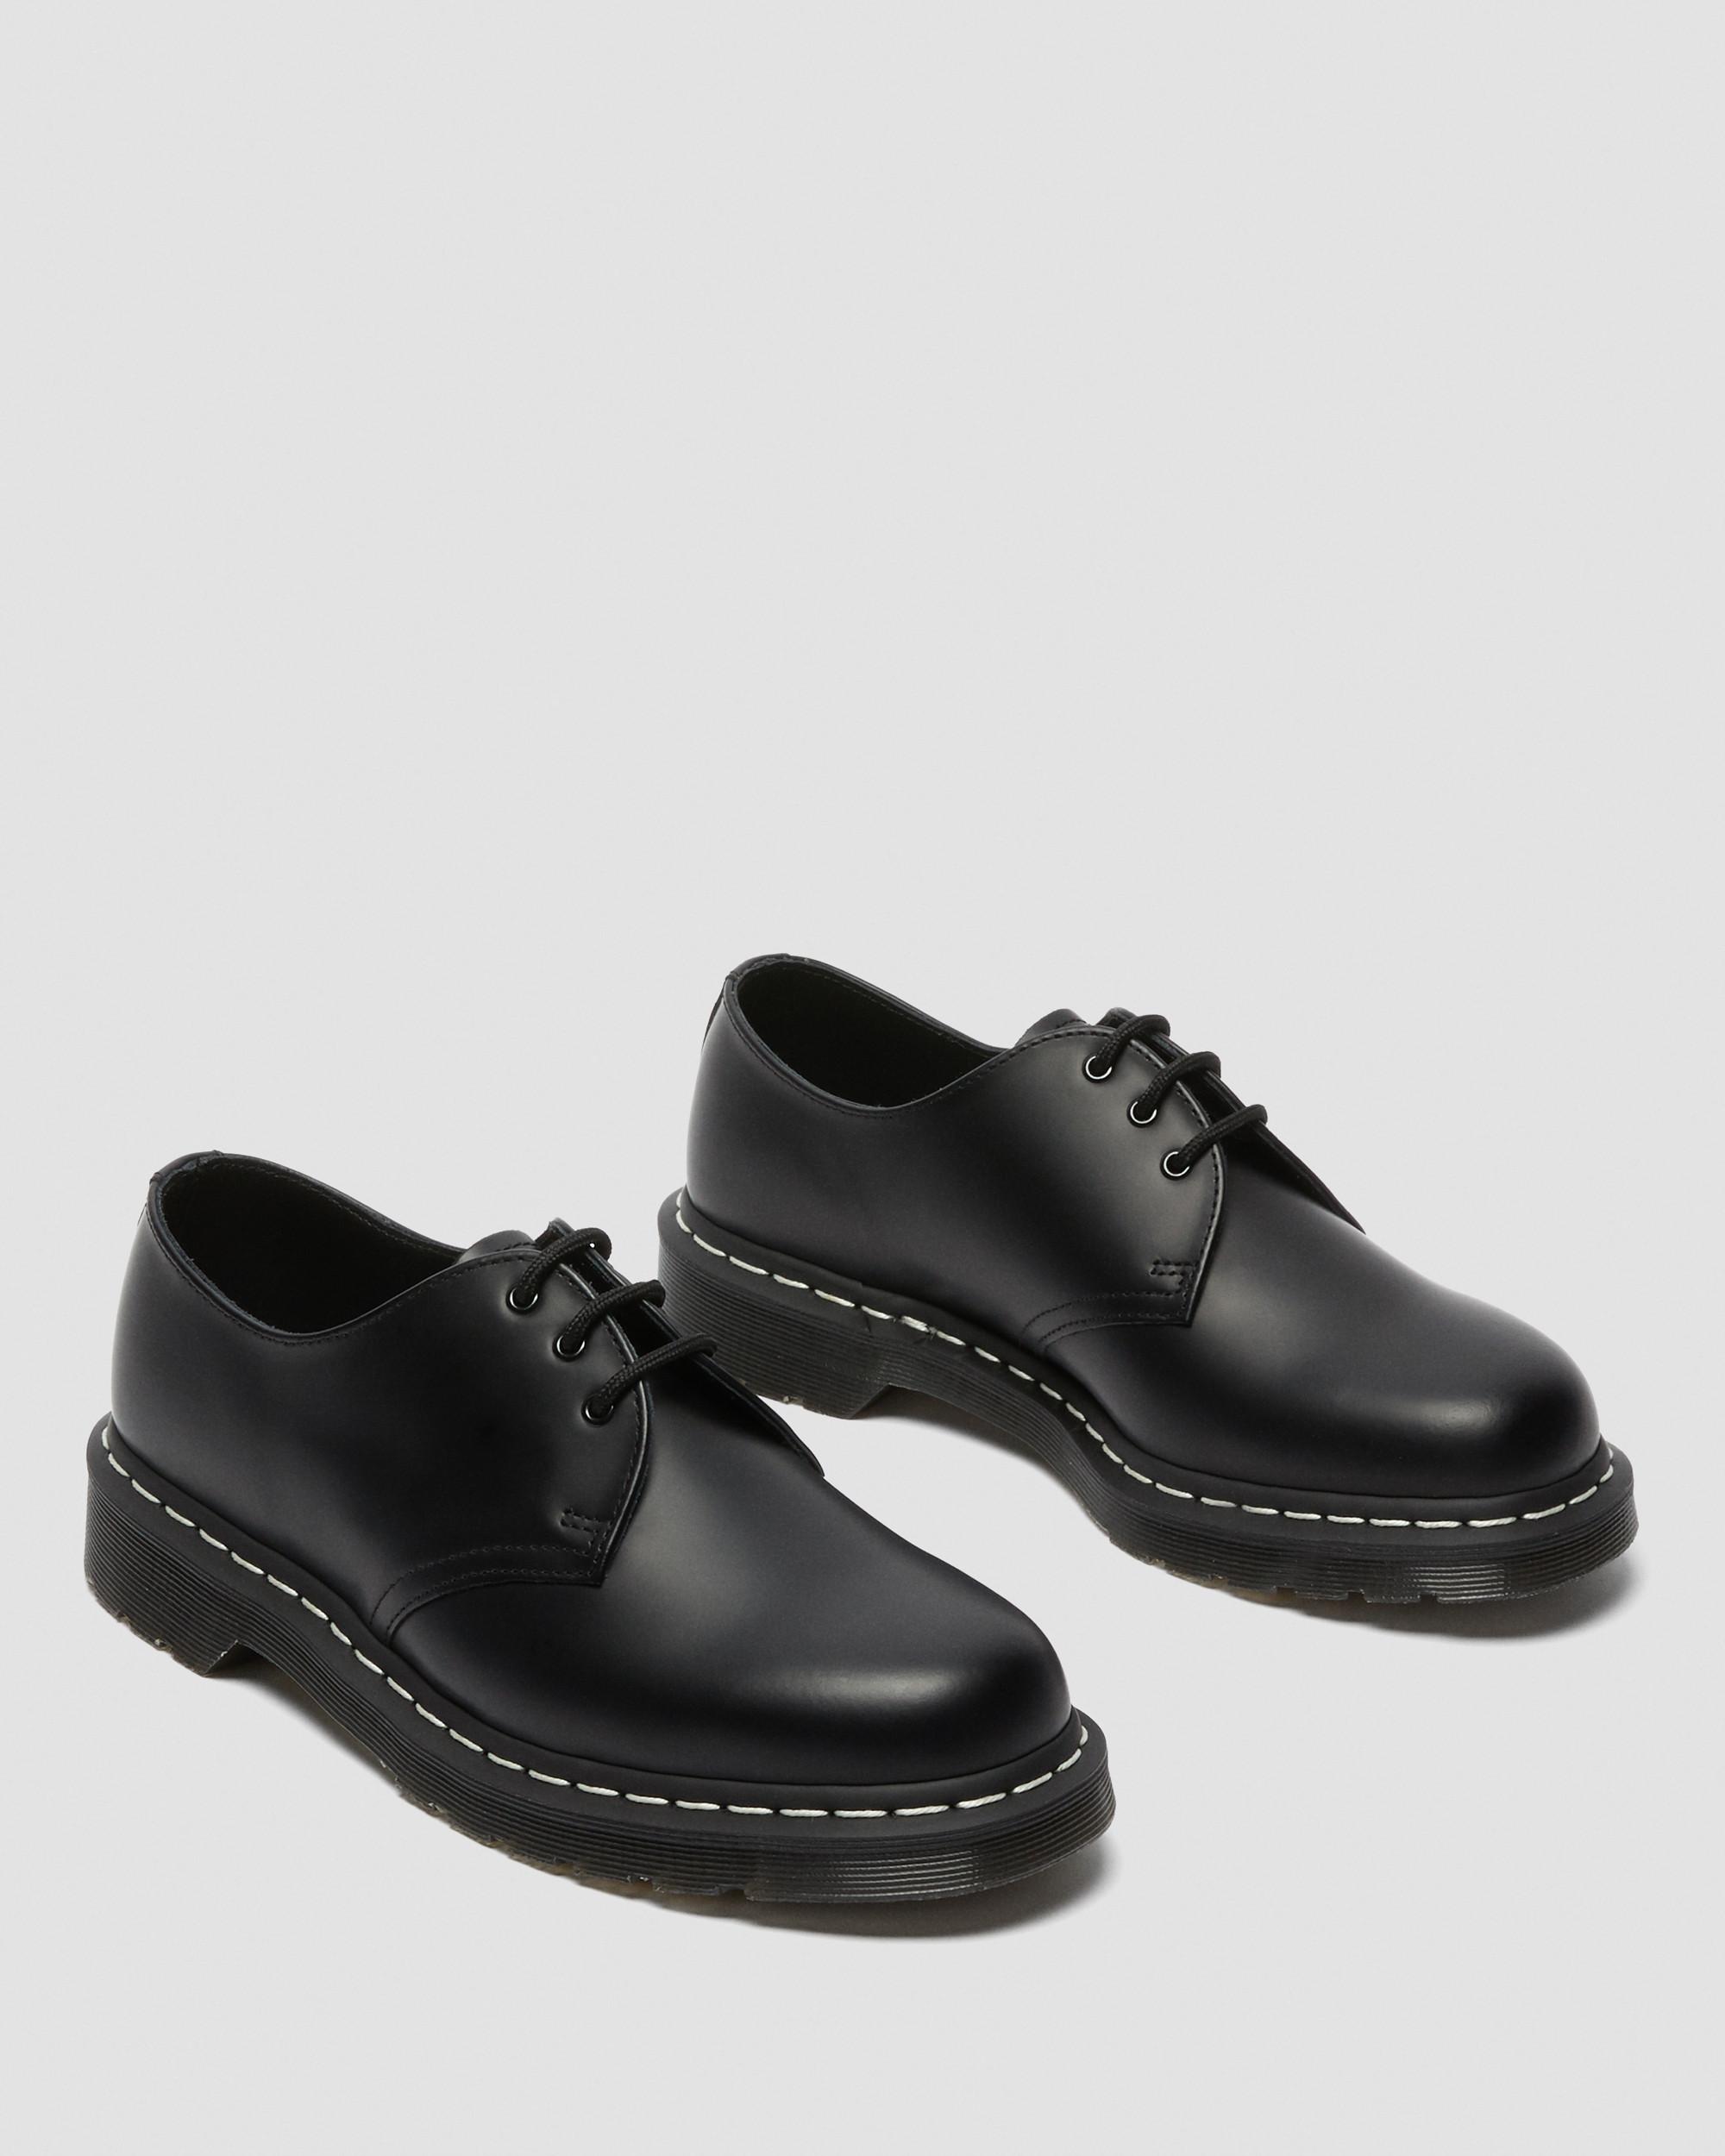 1461 WHITE STITCH LEATHER SHOES in Black | Dr. Martens